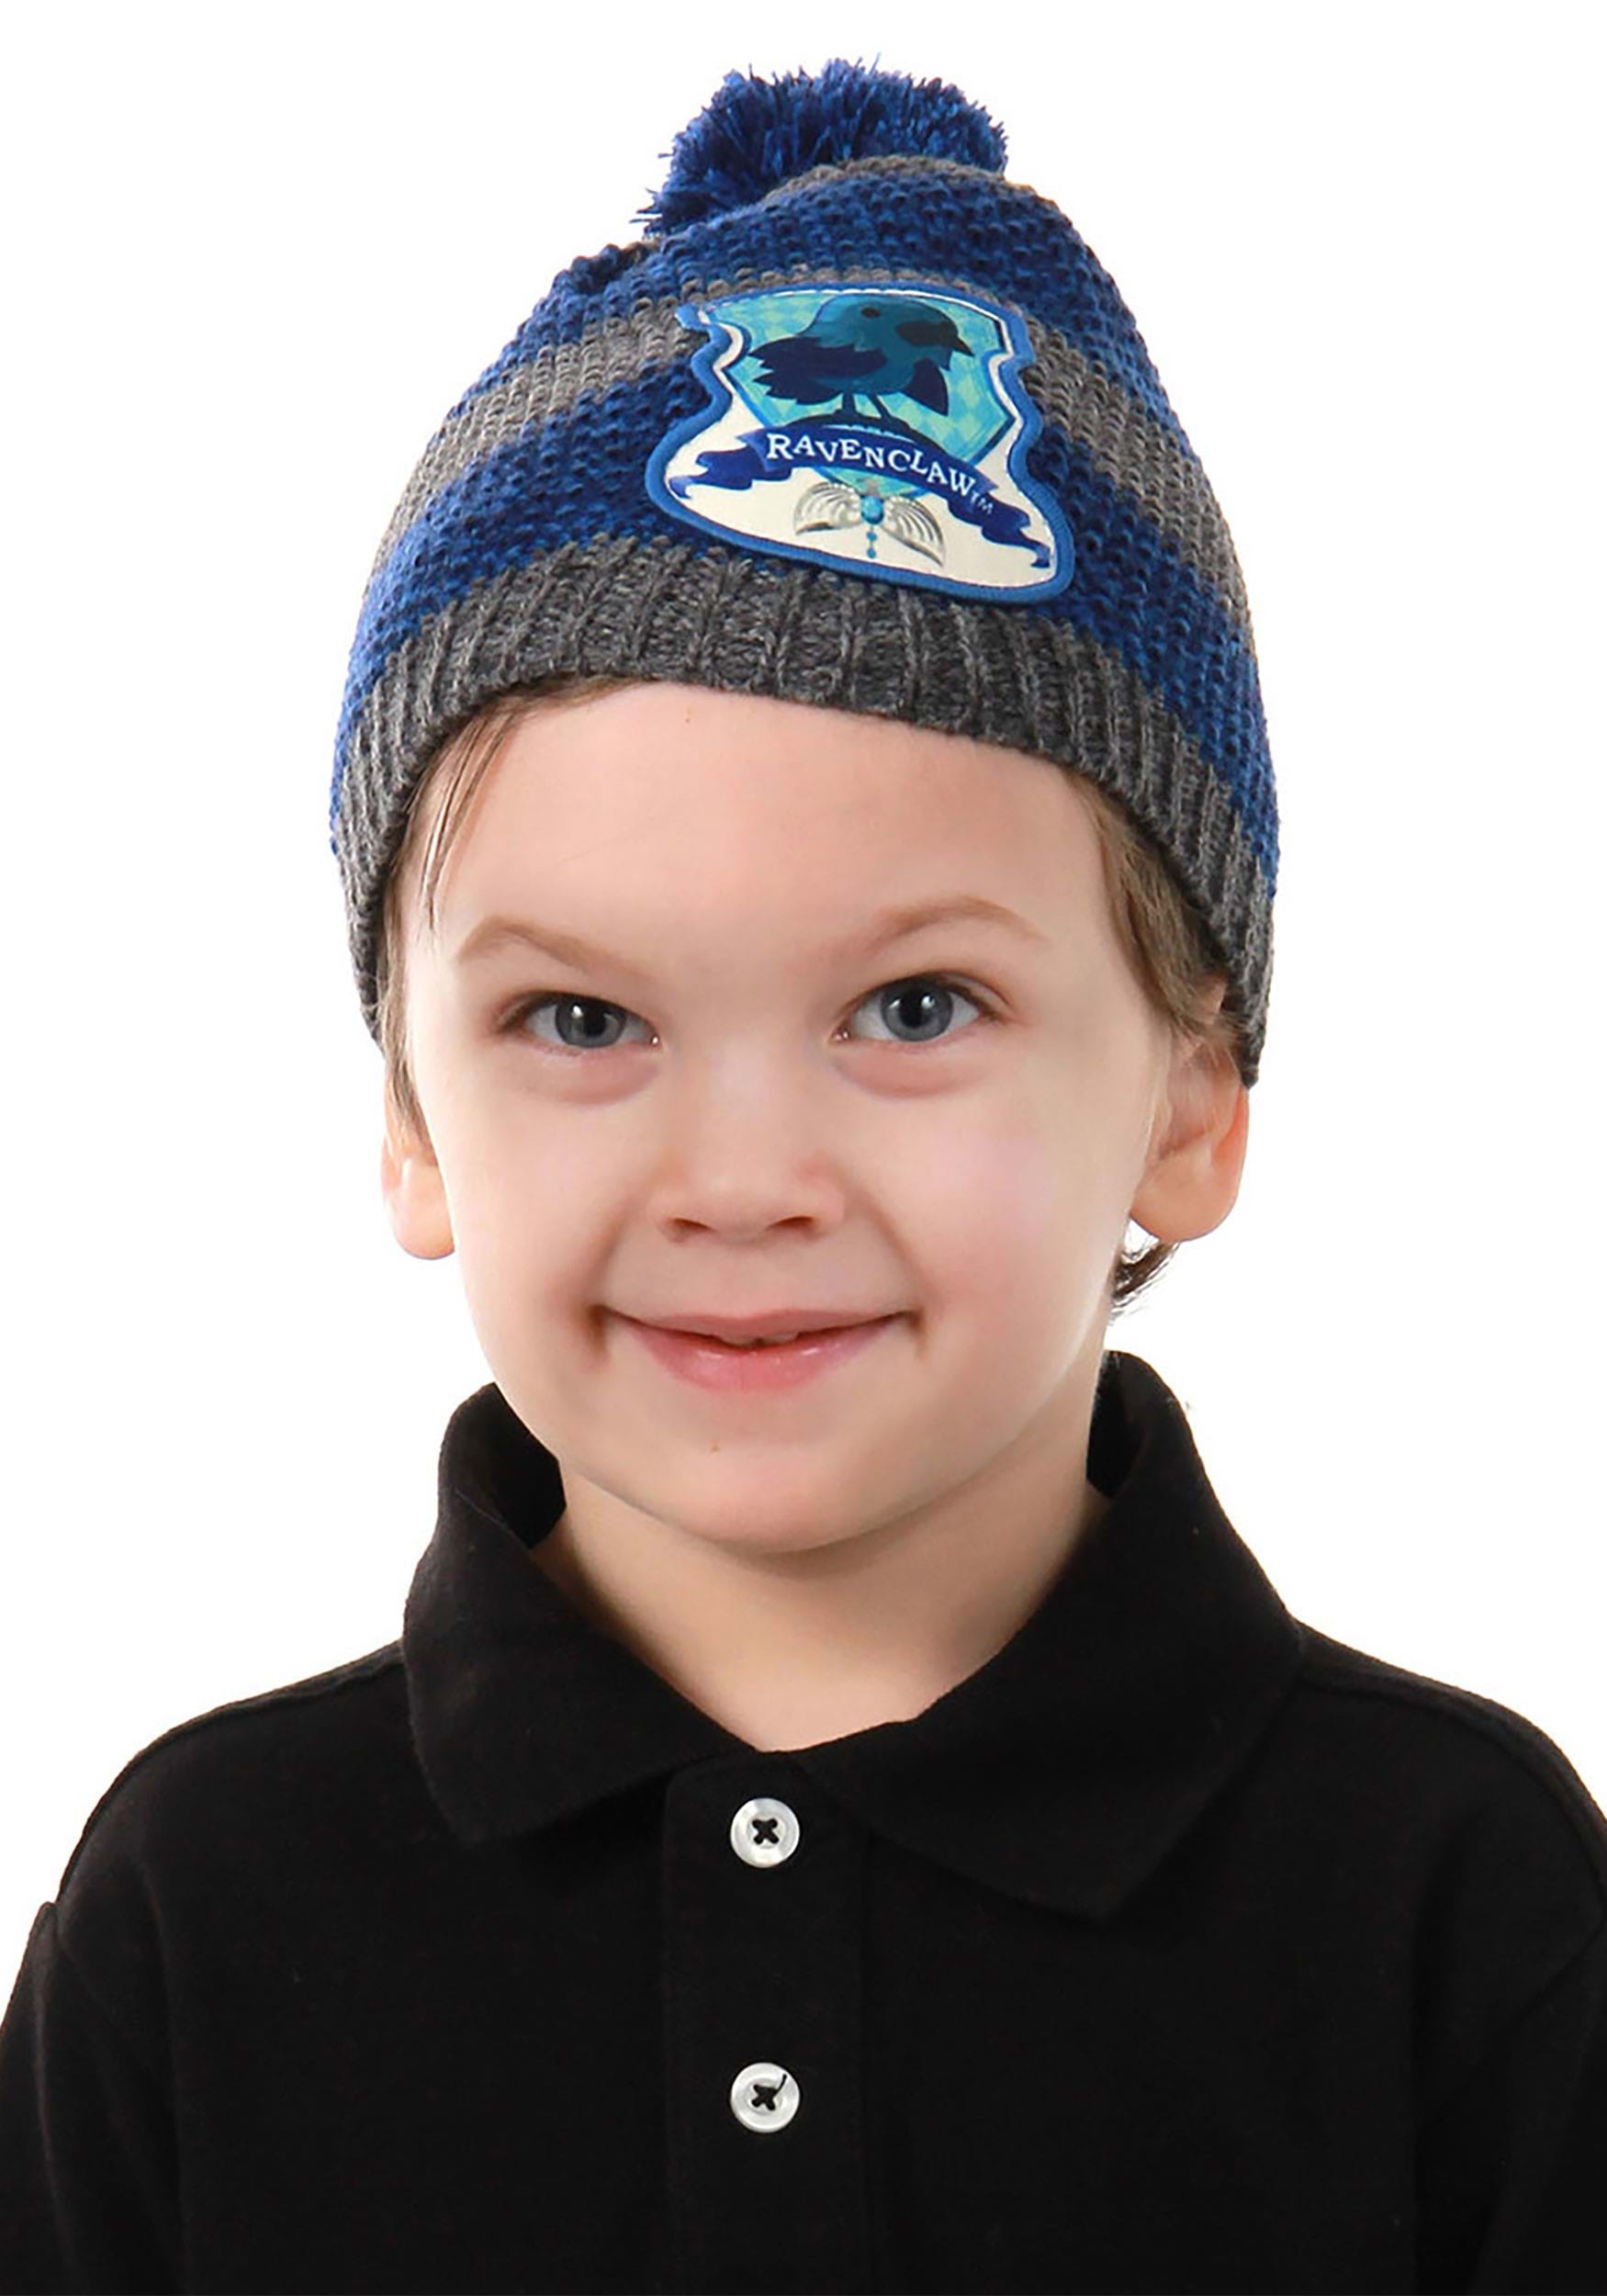 Ravenclaw Knit Warm Beanie for Toddlers